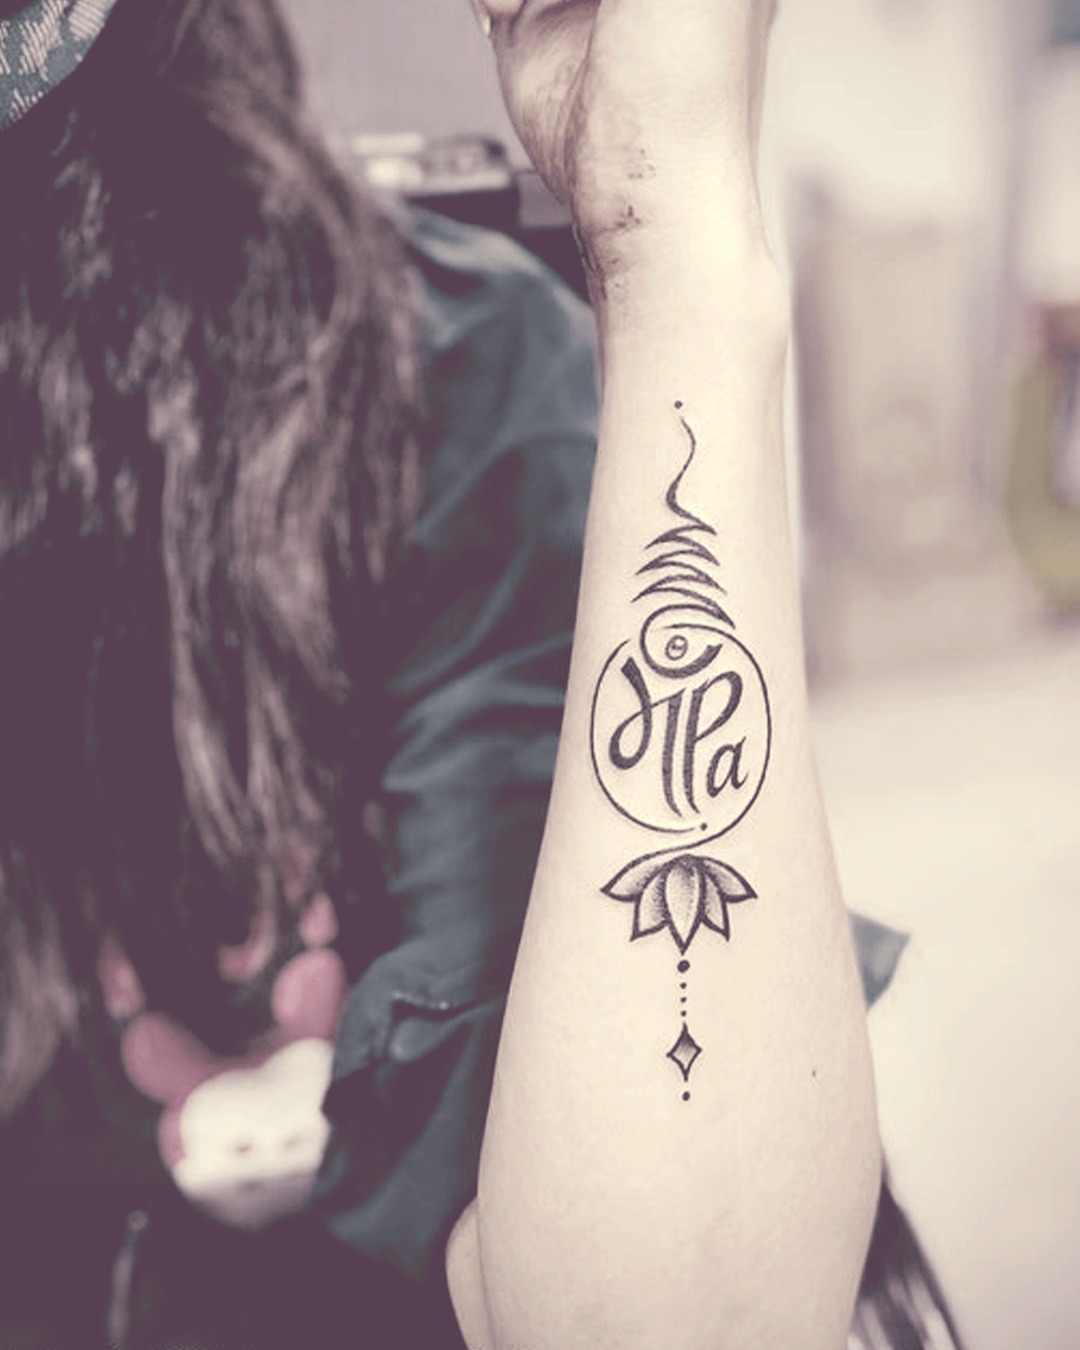 tattoo photo Images  sunny ਸਬ sunny89 on ShareChat